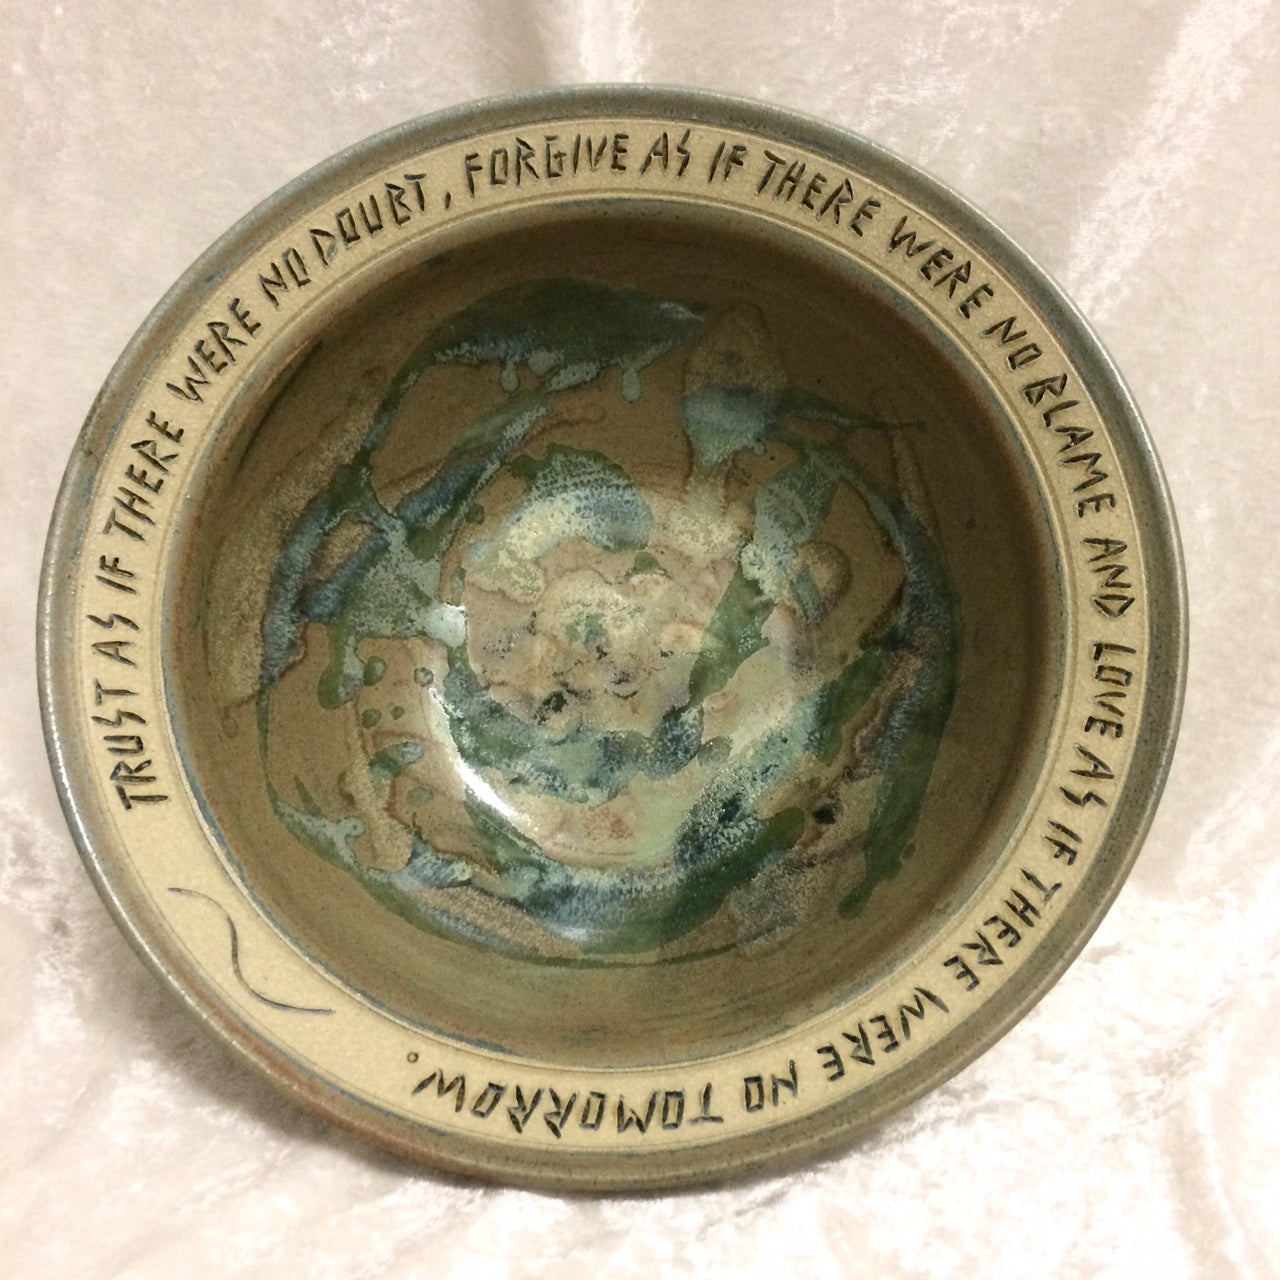 Blessing Bowl - "Trust As If There Were No Doubt"